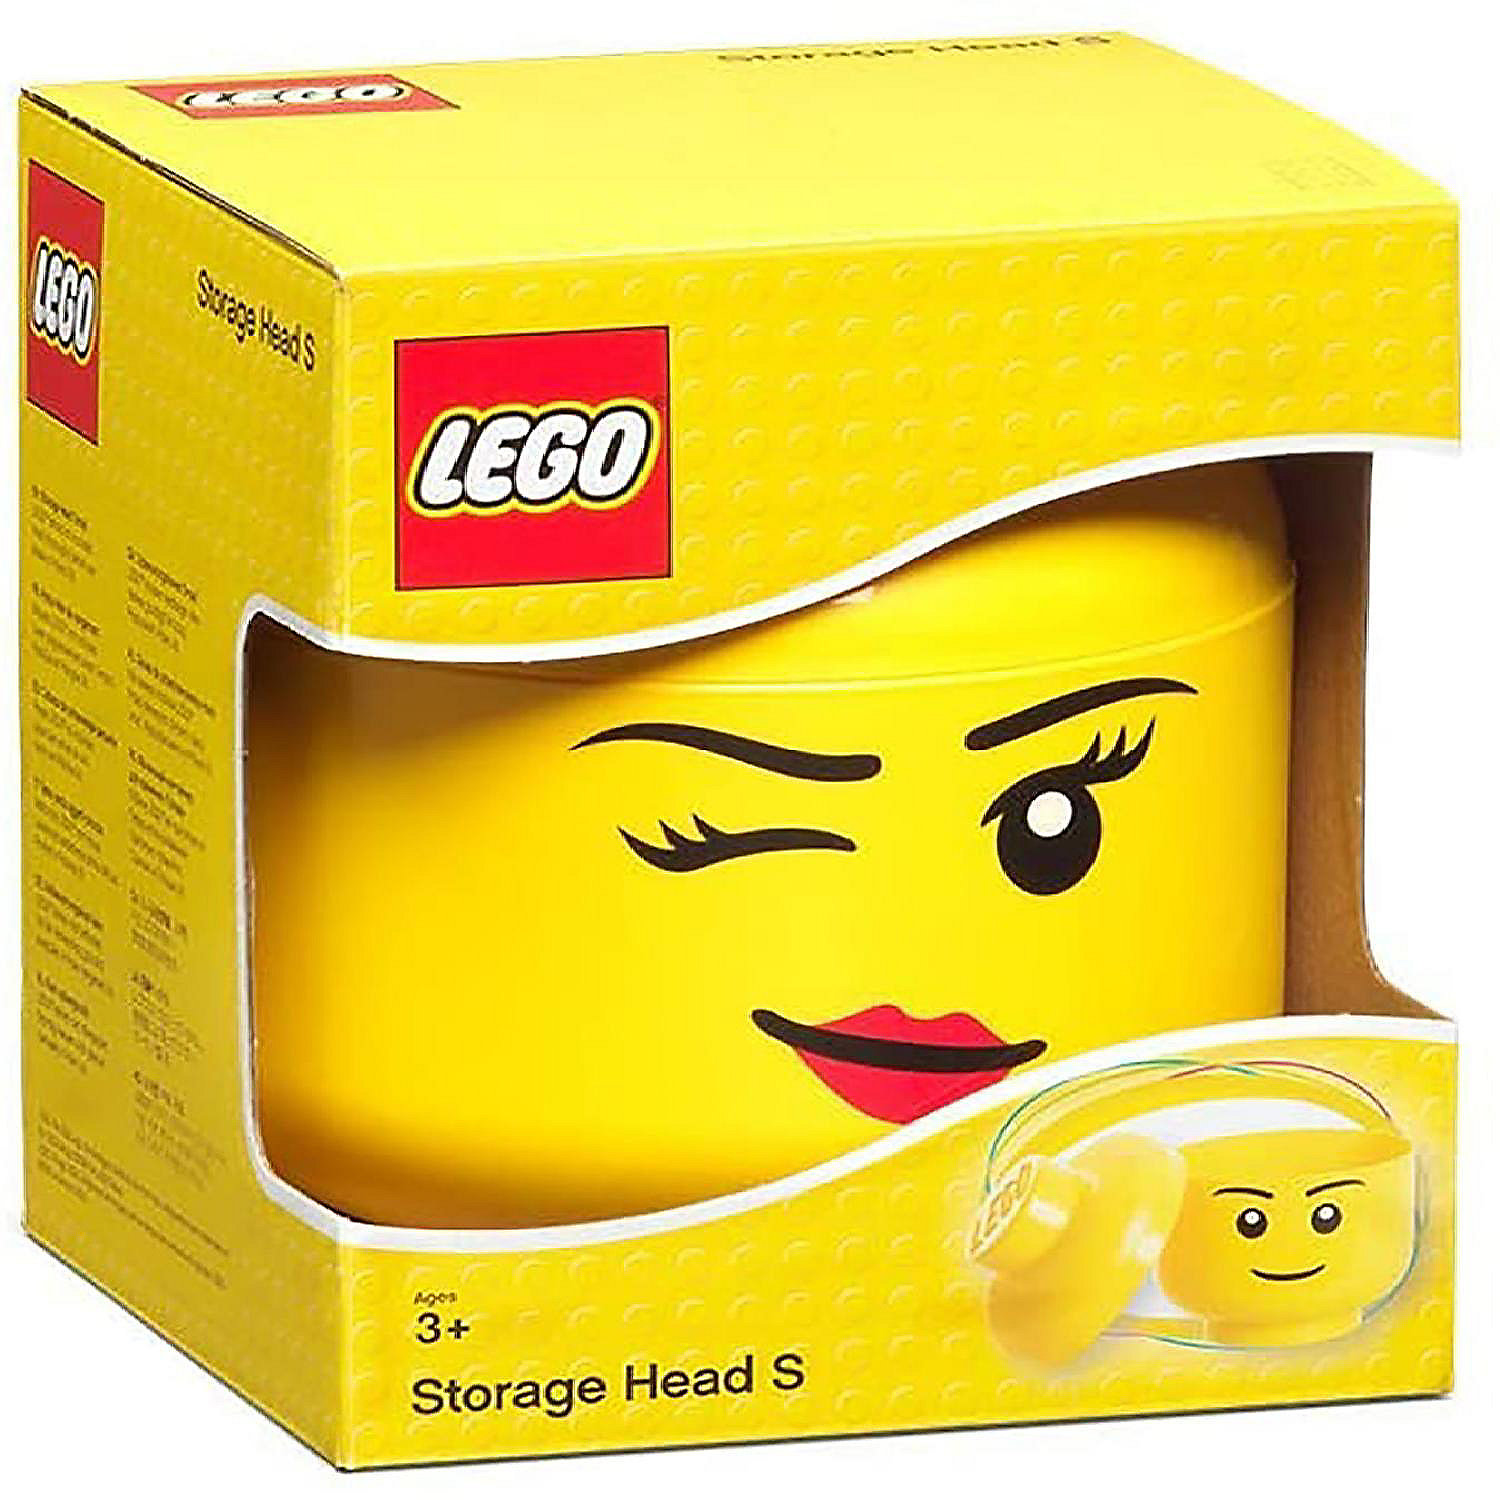 LEGO BPA Yellow Brick Storage Head Small Bin Container Carrying Case Girl for sale online 